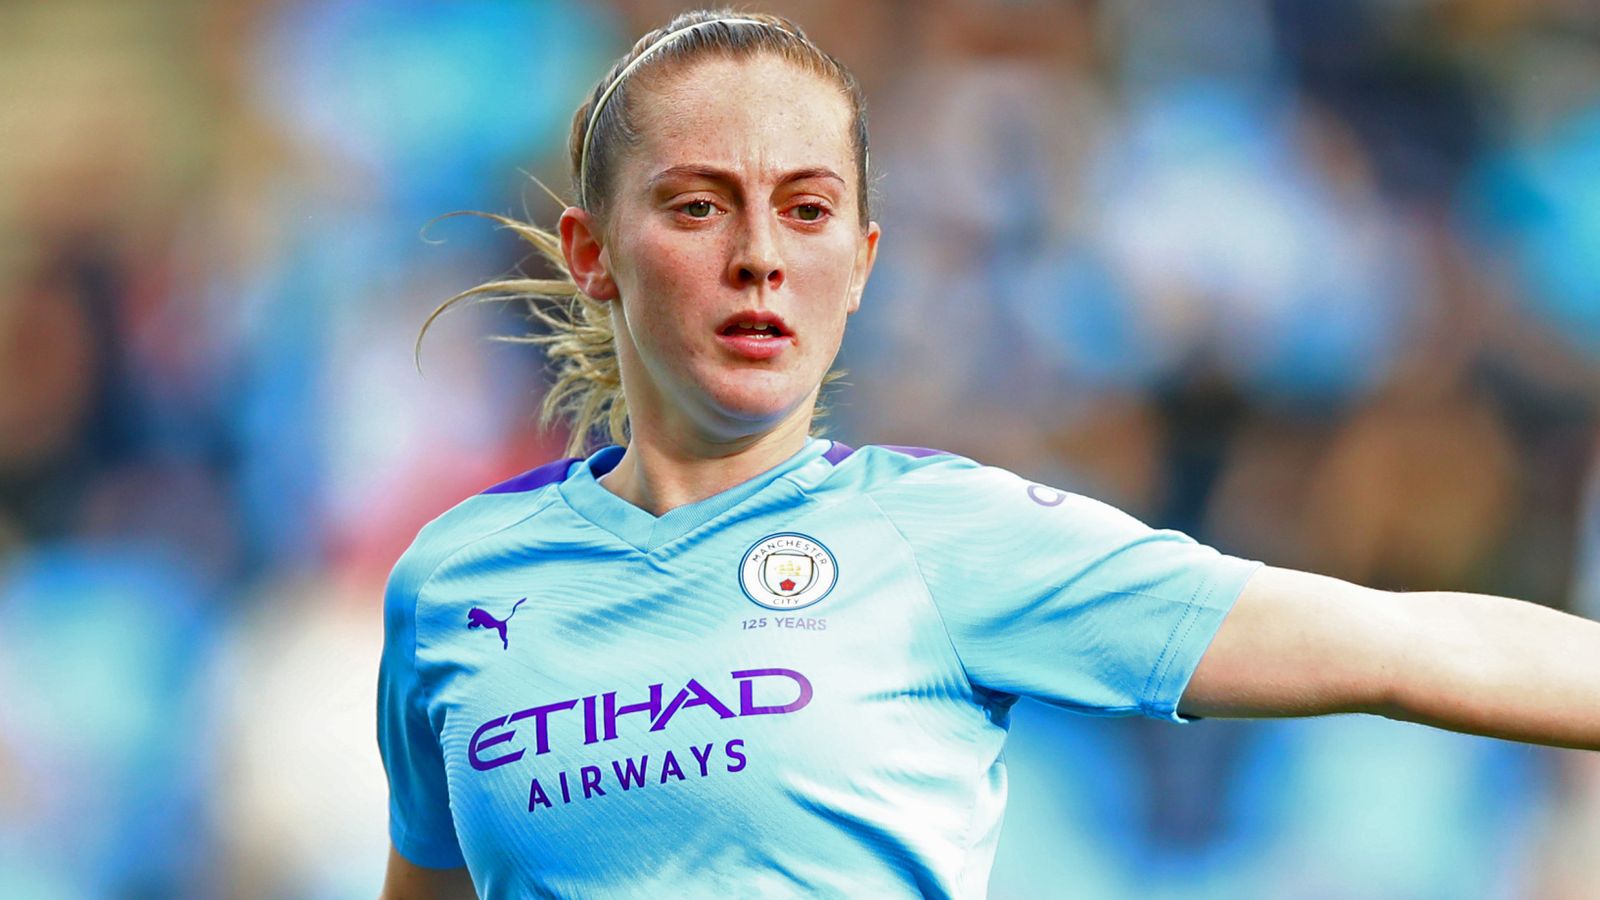  Kiera Walsh in a blue Manchester City shirt playing soccer during a match.